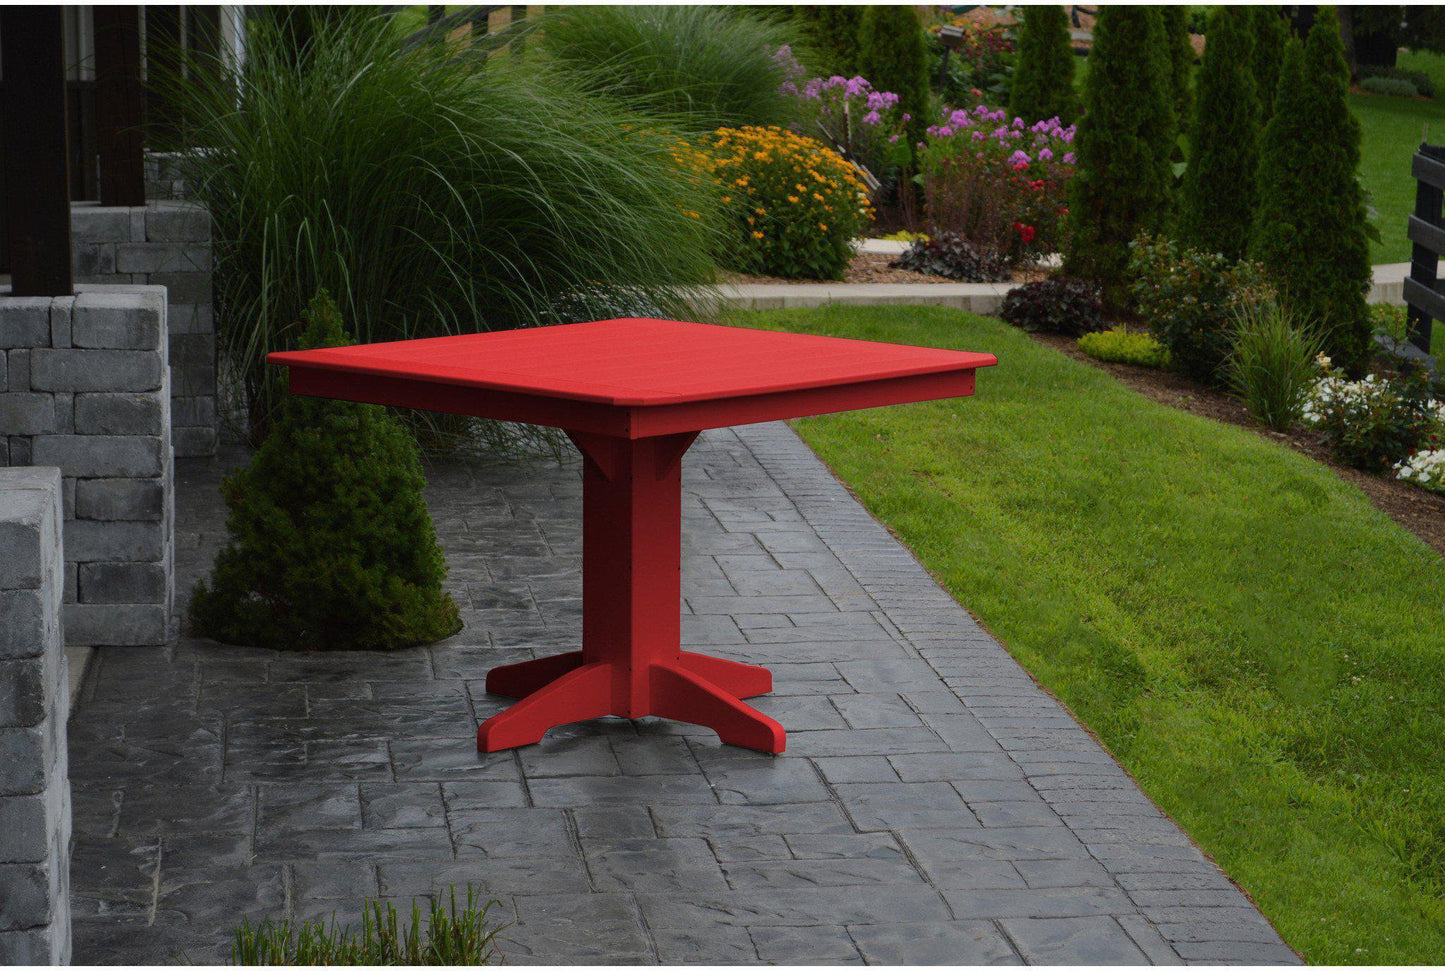 A&L Furniture Recycled Plastic 44" Square Dining Table - Bright Red